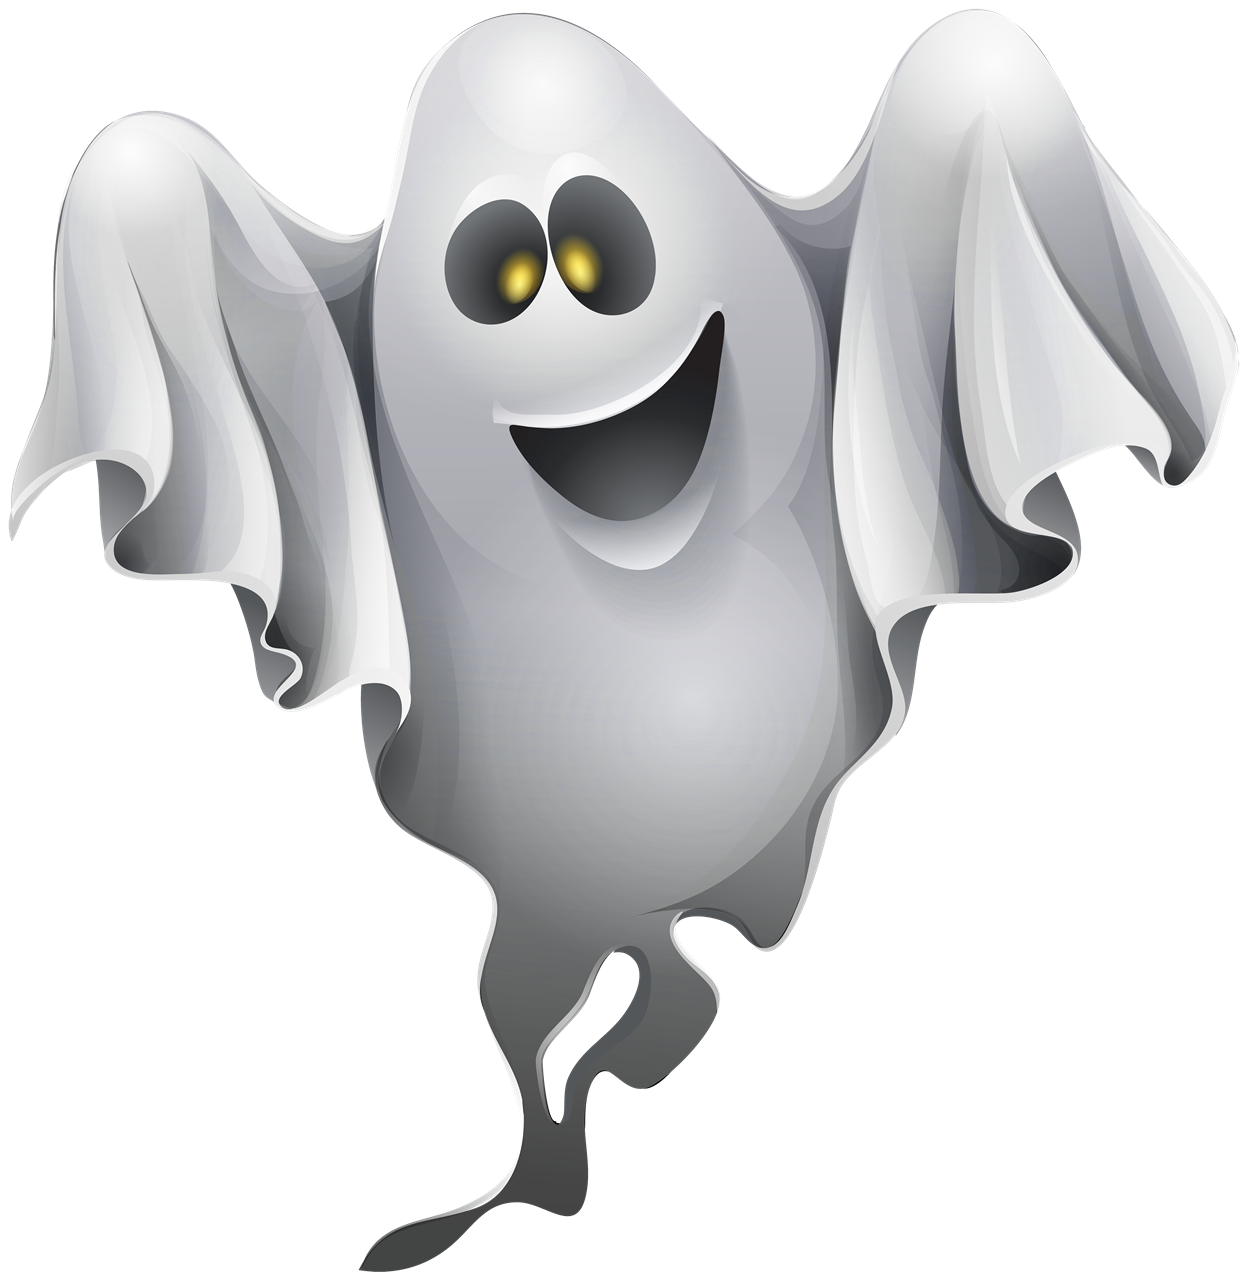 Ghost PNG Transparent Image